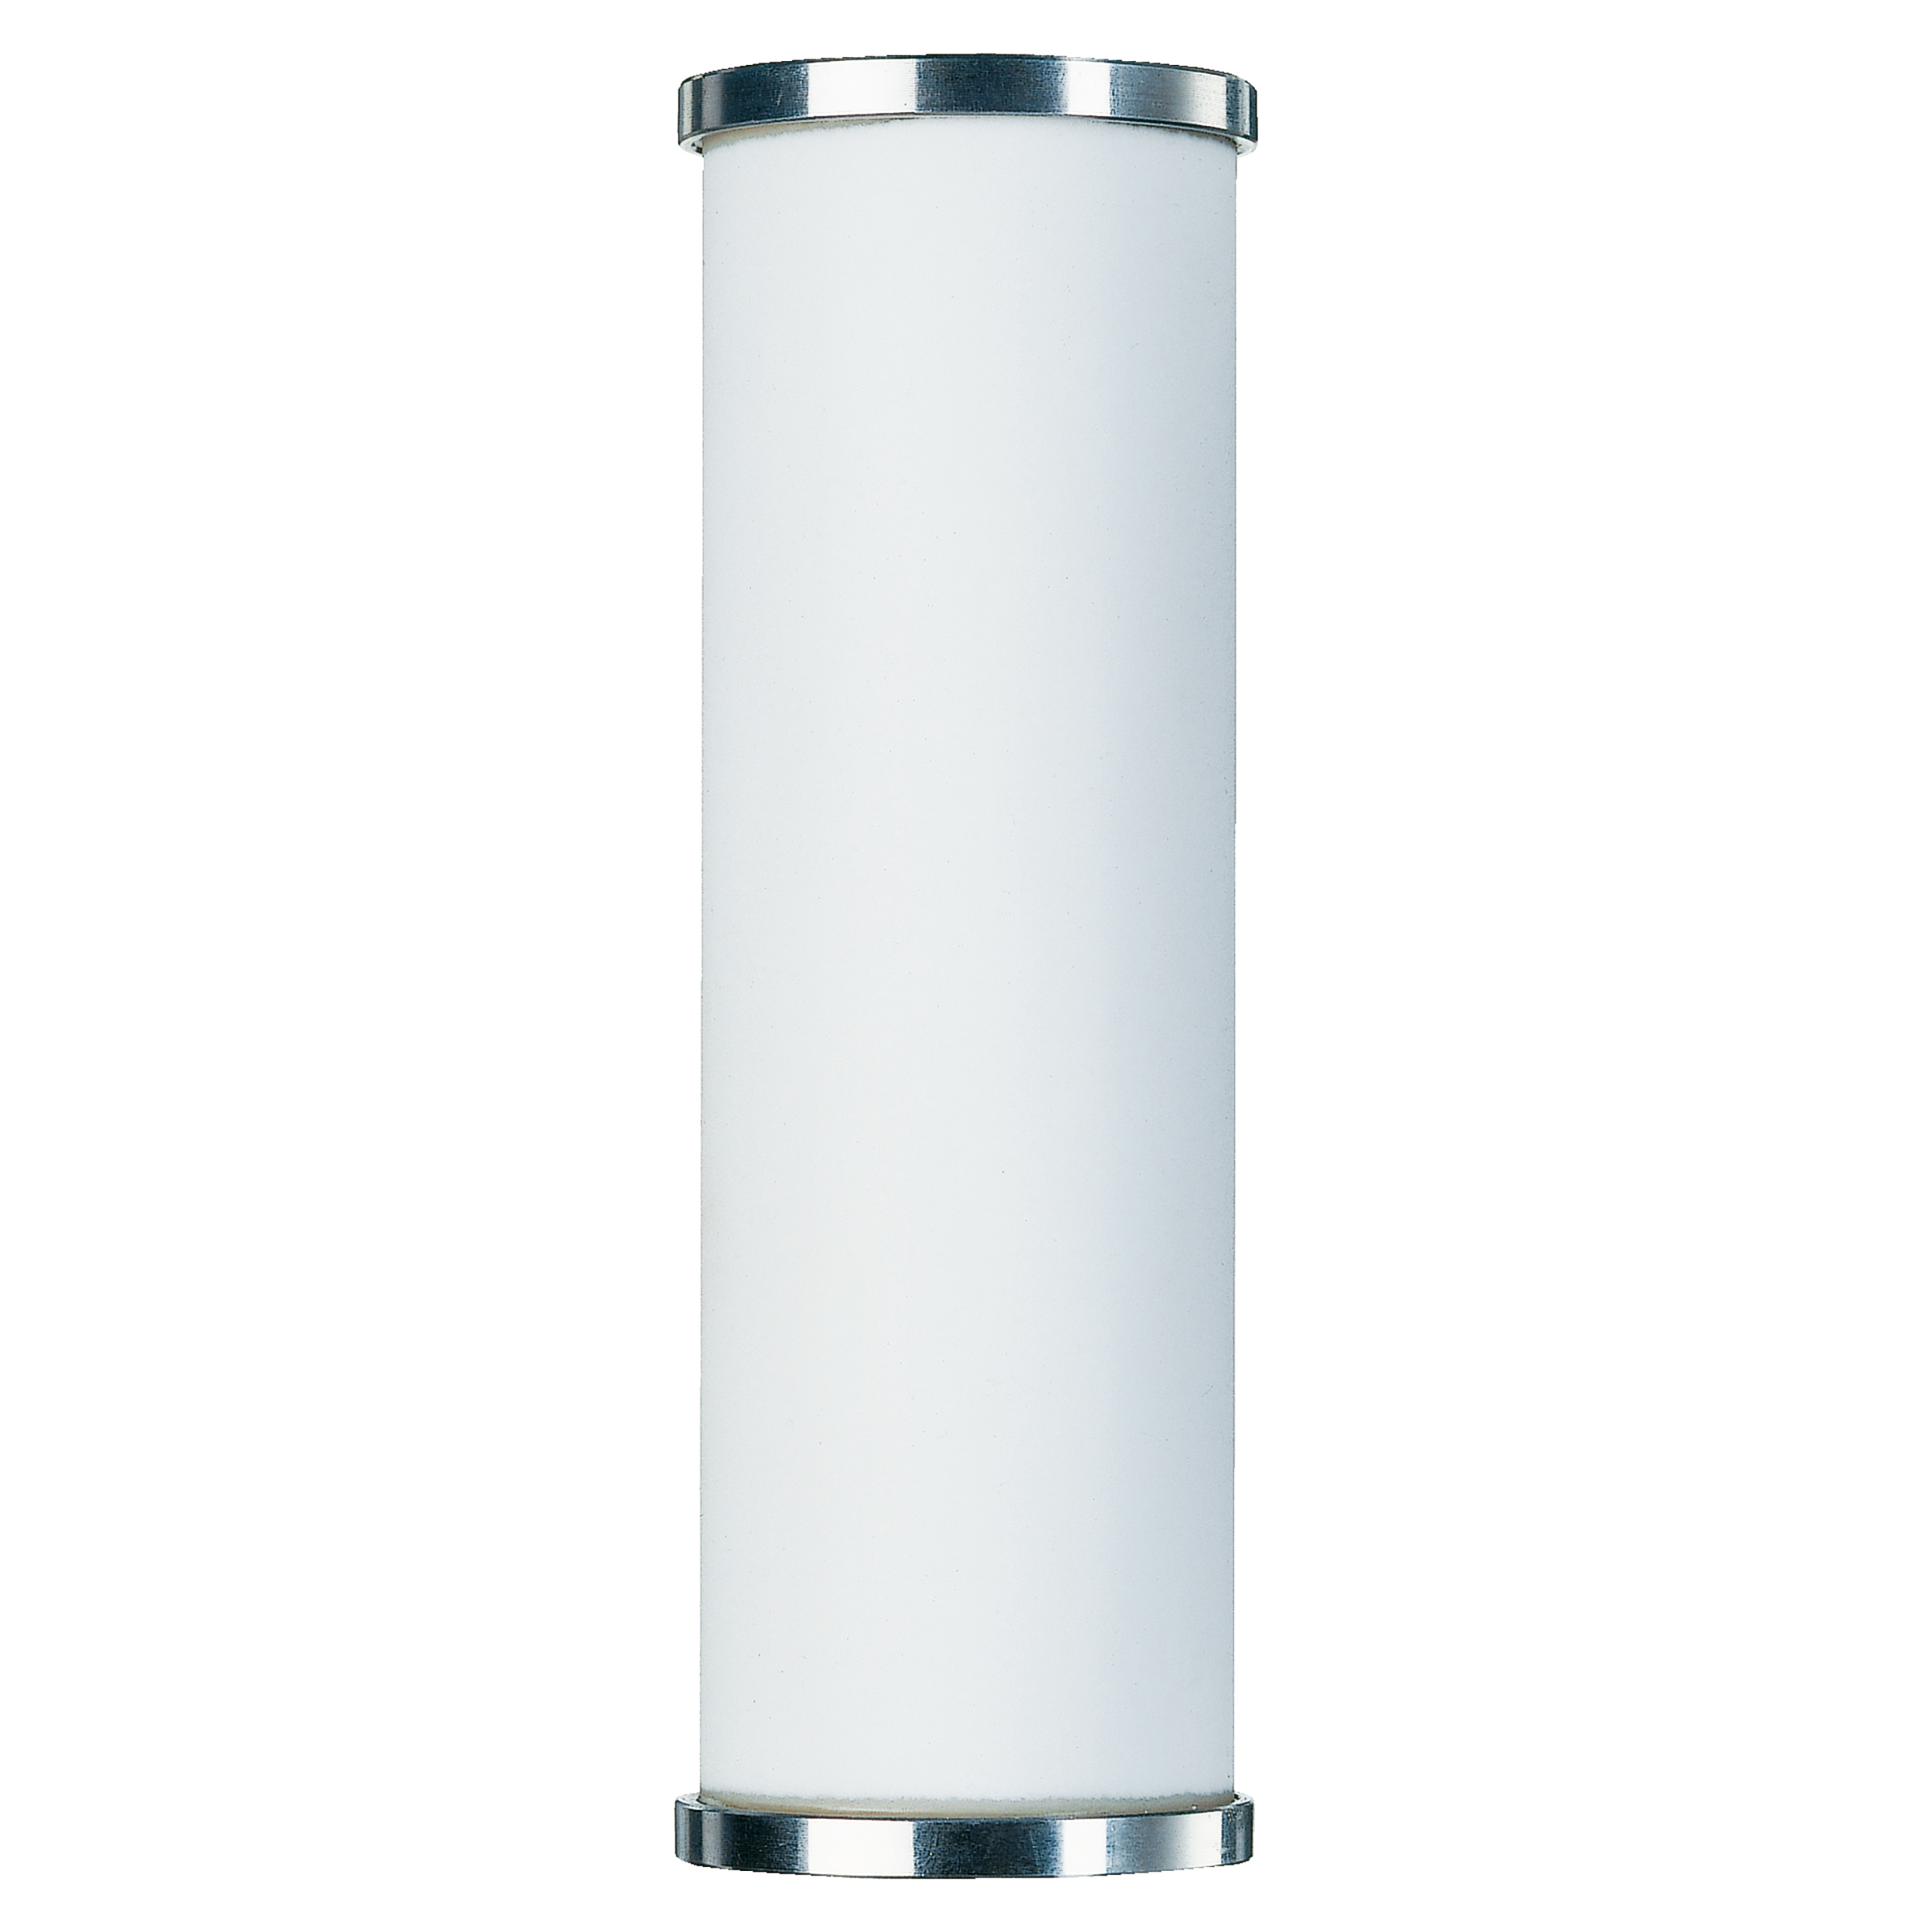 Pre-filter insert, vma BG 90-3, A: Ø71 mm, B1: Ø48 mm, B2: Ø12 mm, C (height): 310 mm, XR